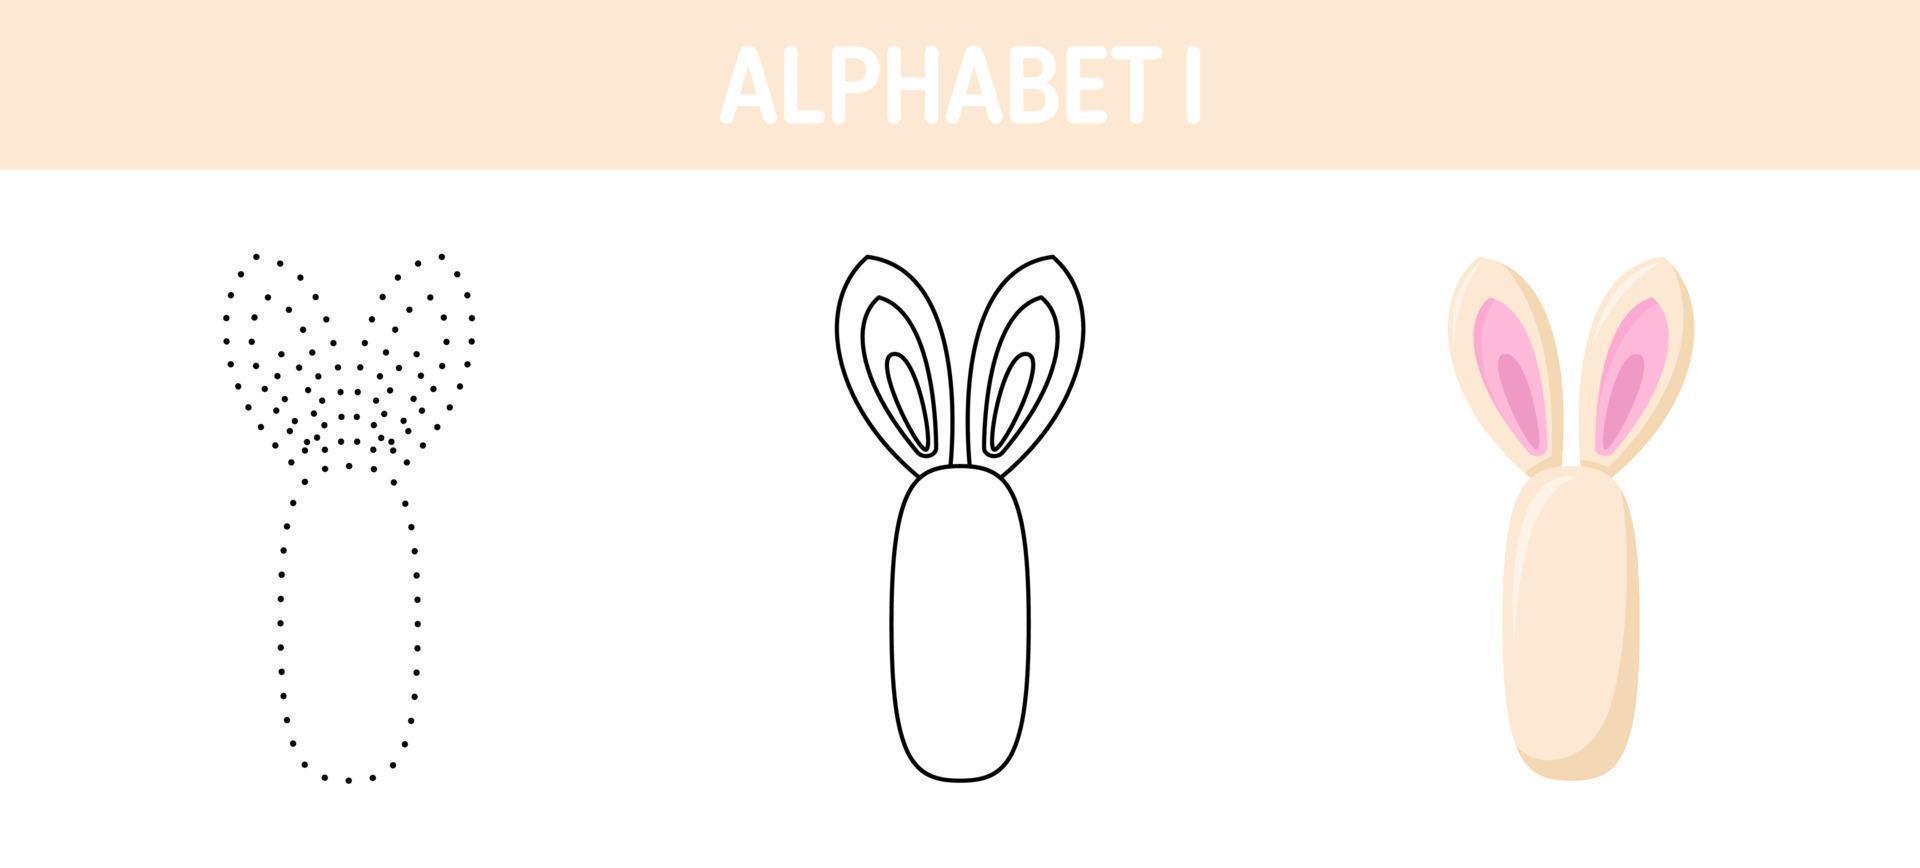 Alphabet I tracing and coloring worksheet for kids vector